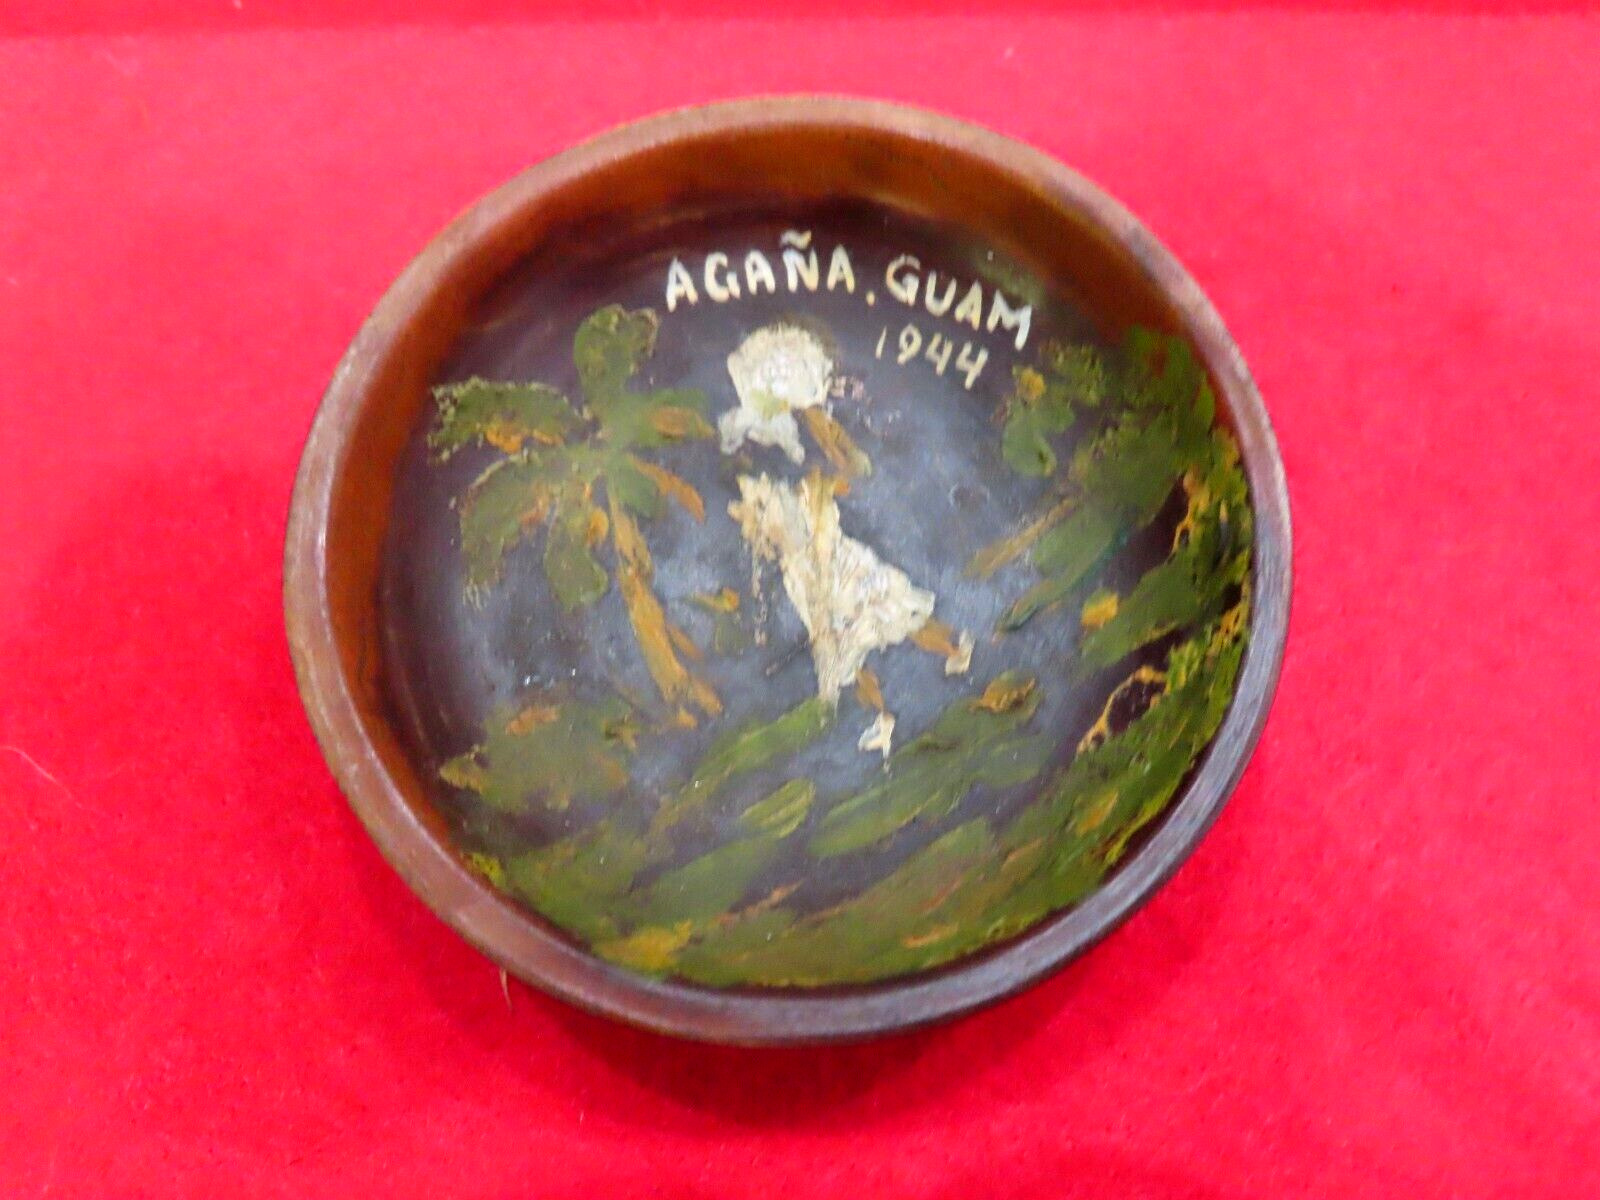 VERY RARE WWII 1944 Souvenir Wooden Bowl from Agana Guam L4.24